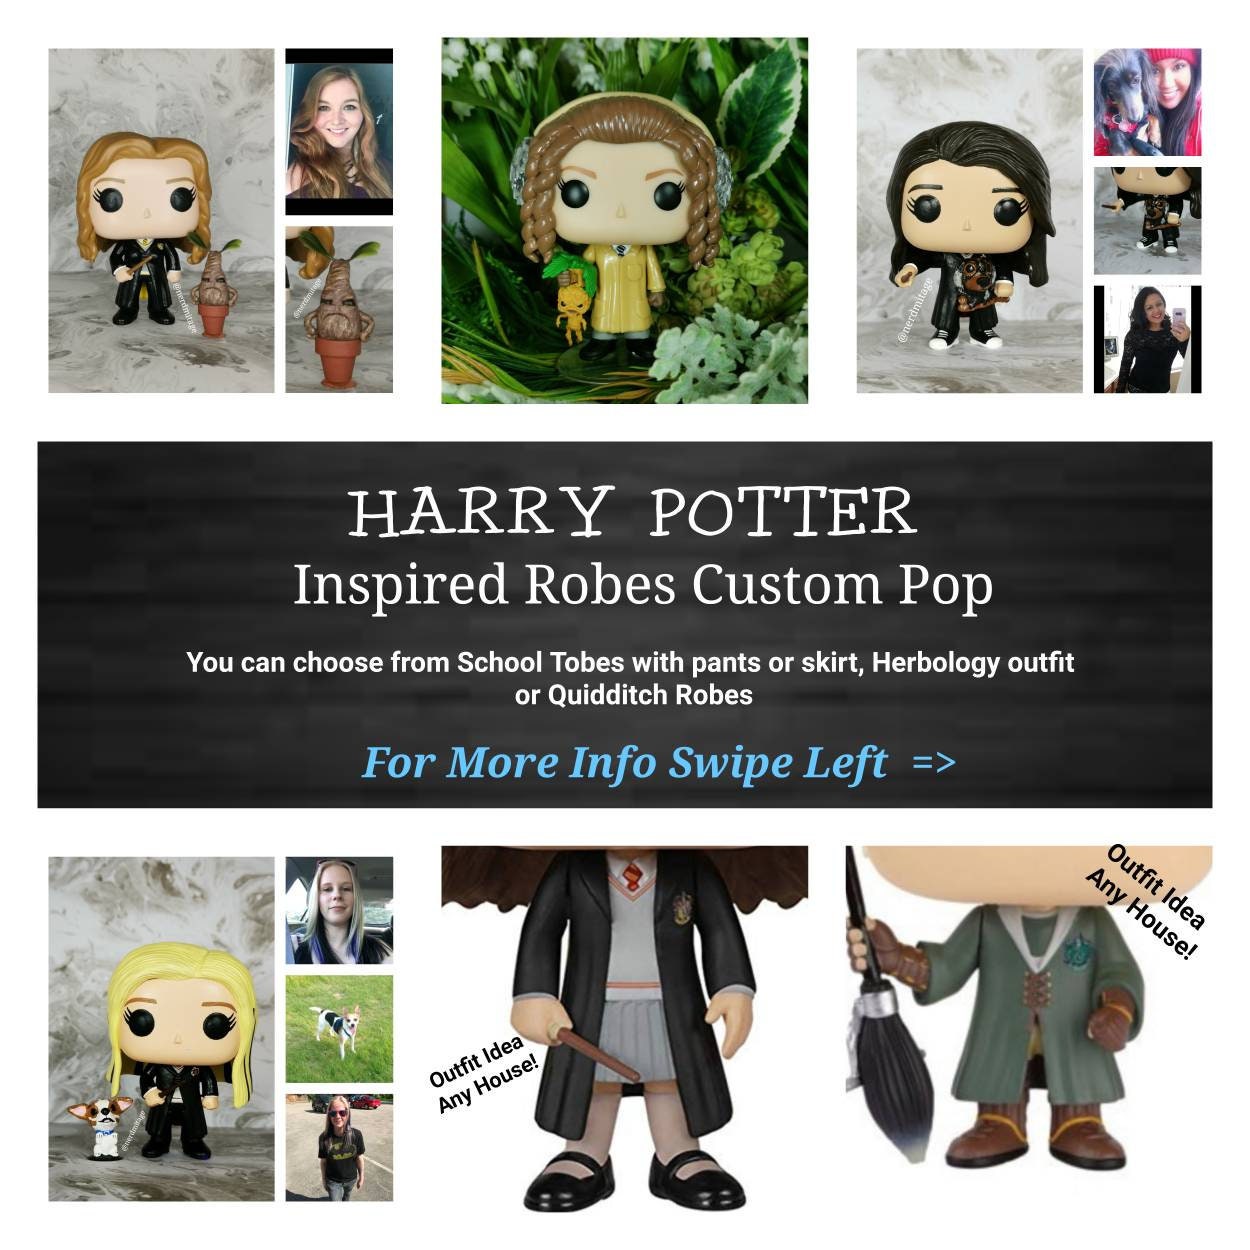 Exclusive reveal: new Harry Potter Funko Pop lets you visit